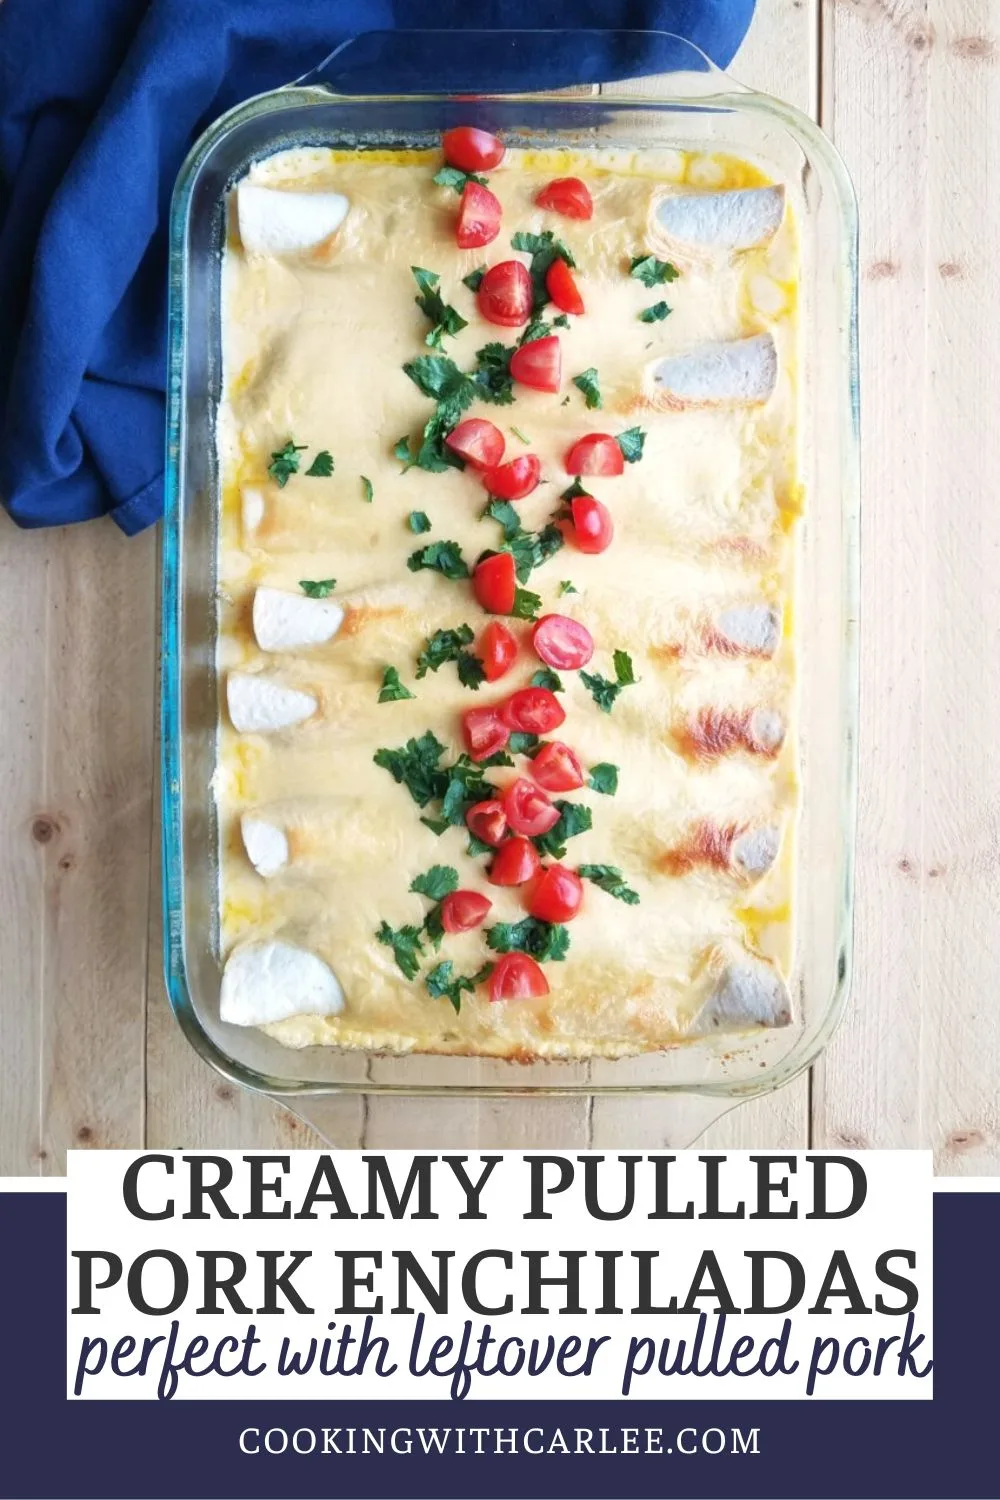 These creamy pulled pork enchiladas are the perfect way to turn leftover pulled pork into a whole new meal. They are part BBQ, part Tex-Mex and full of flavor. The sour cream and cheese sauce makes them creamy, comforting and next level good.